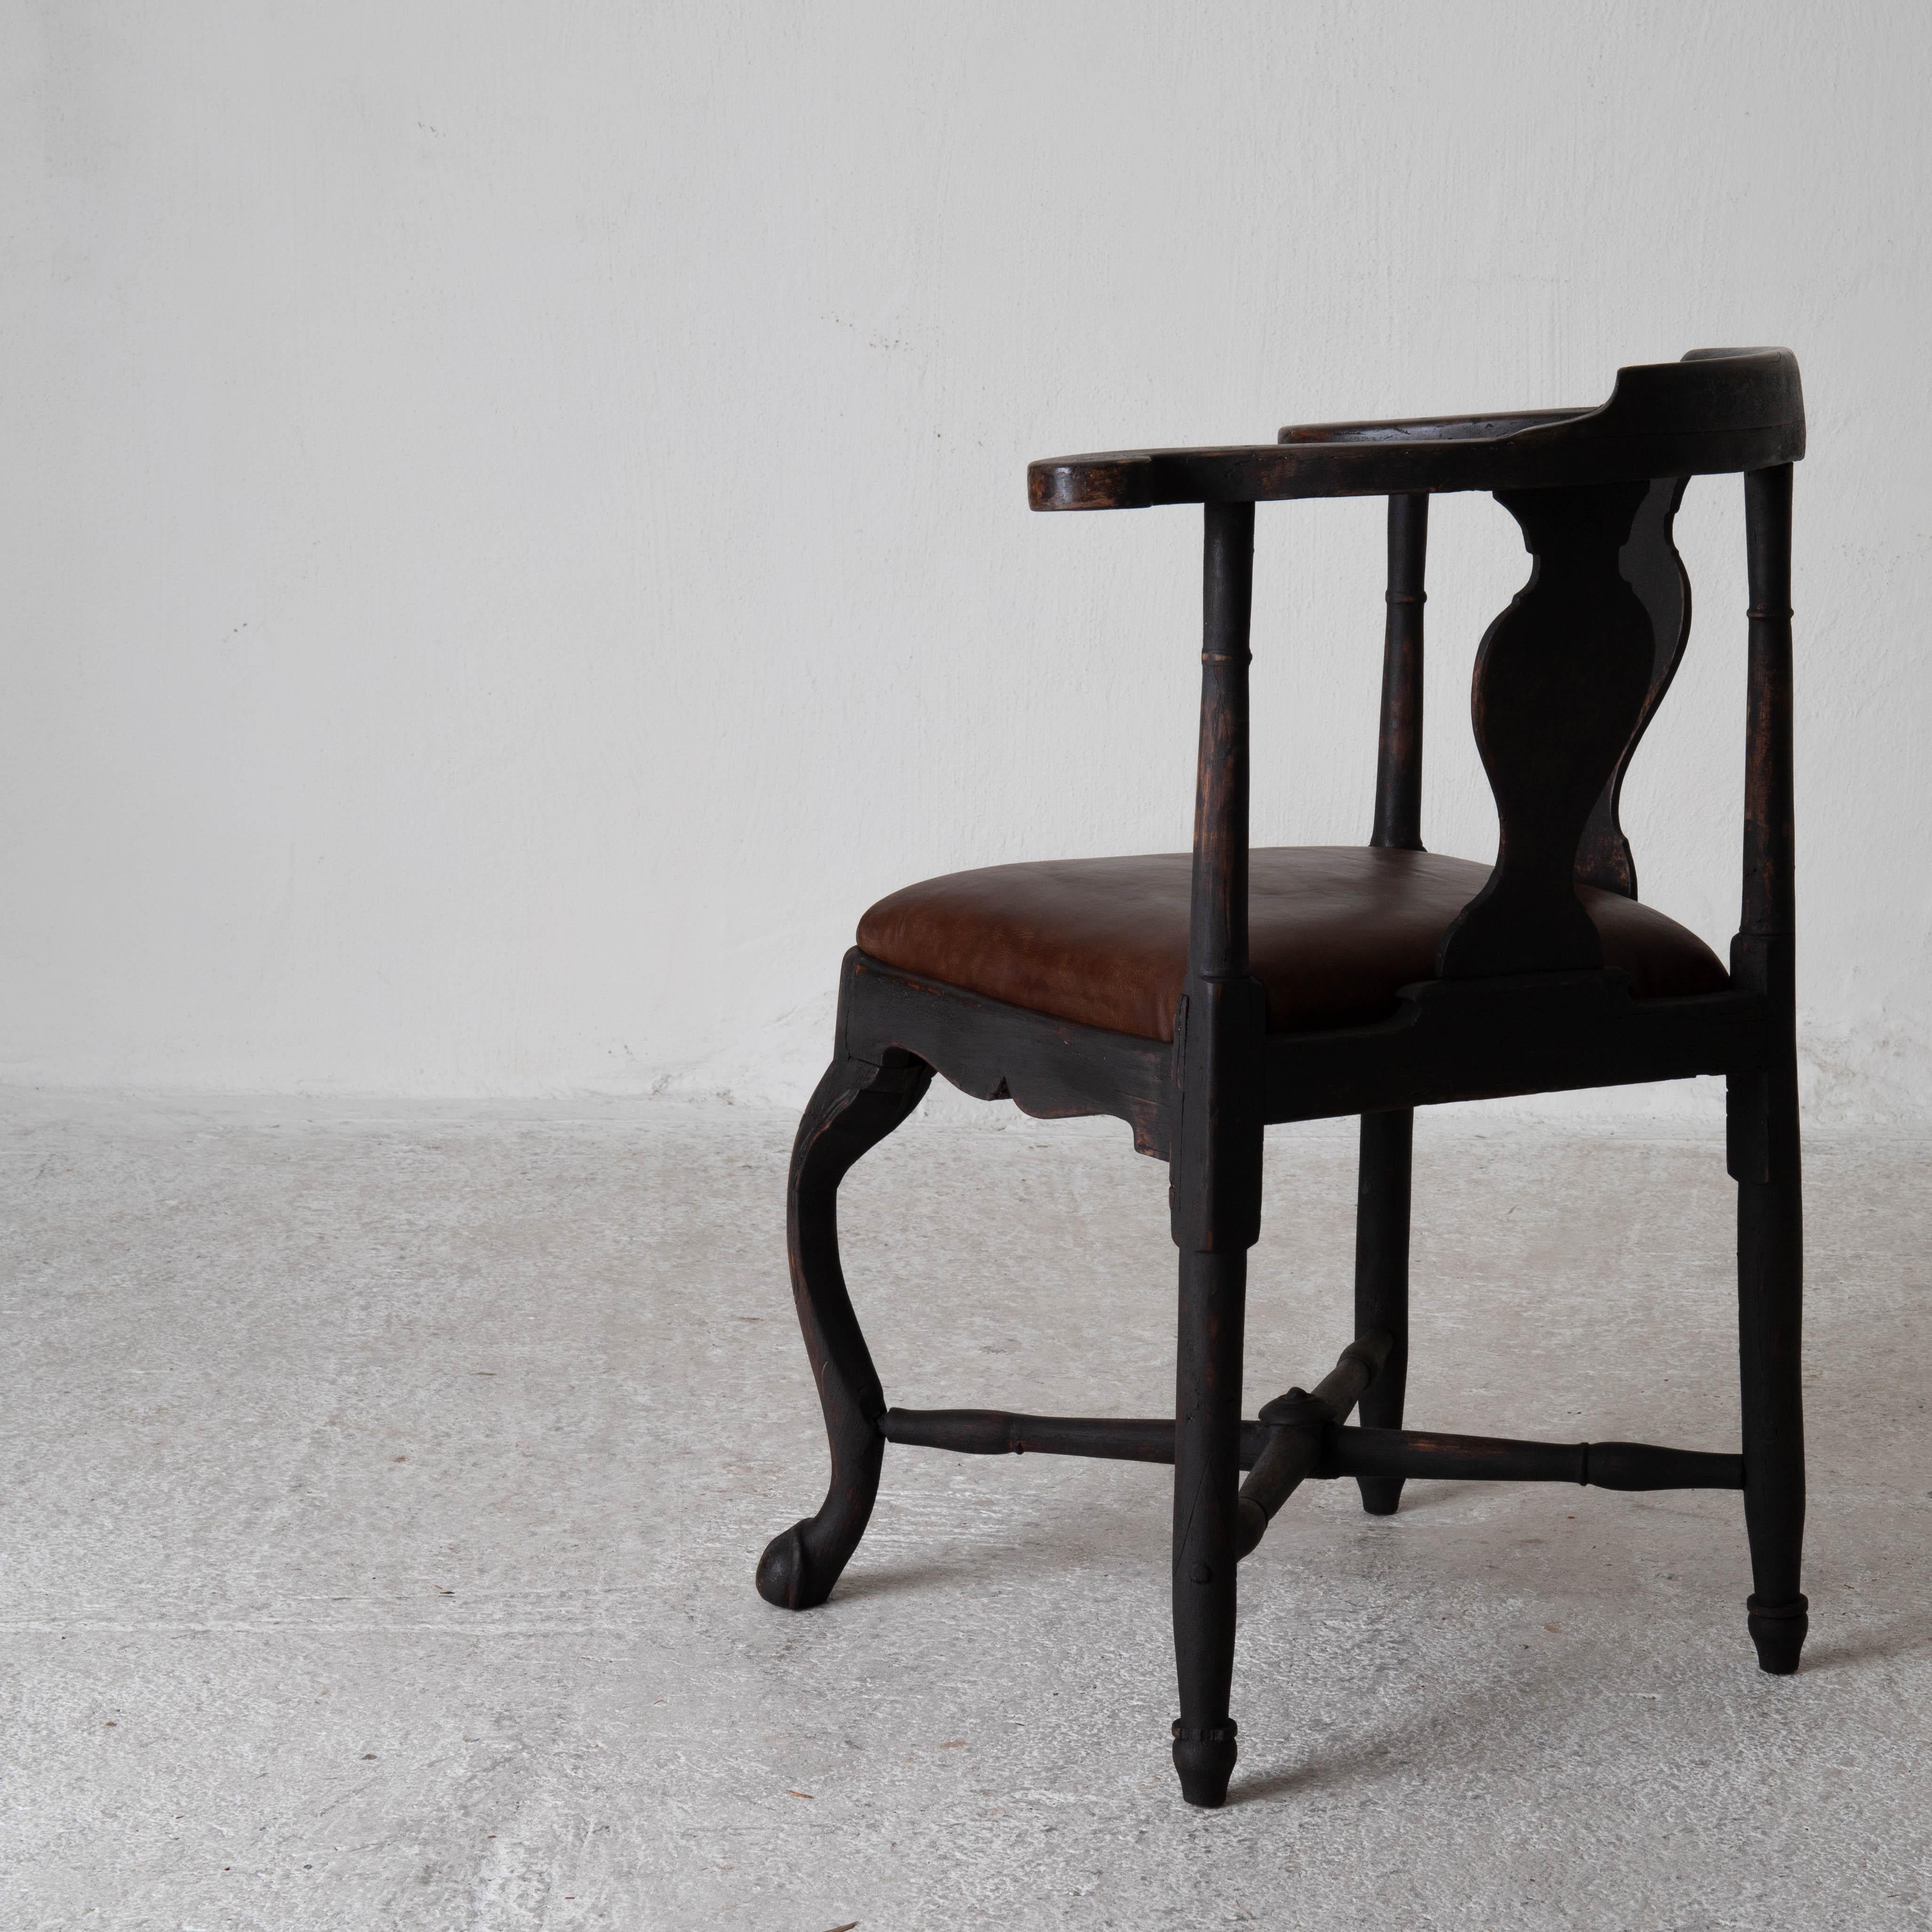 Armchair Swedish Rococo period black brown Sweden. An armchair called powder chair made during the Rococo period 1750-1775 in Sweden. Refinished in our Black and reupholstered in a brown vintage leather. Front leg ending in a claw and ball. Urn